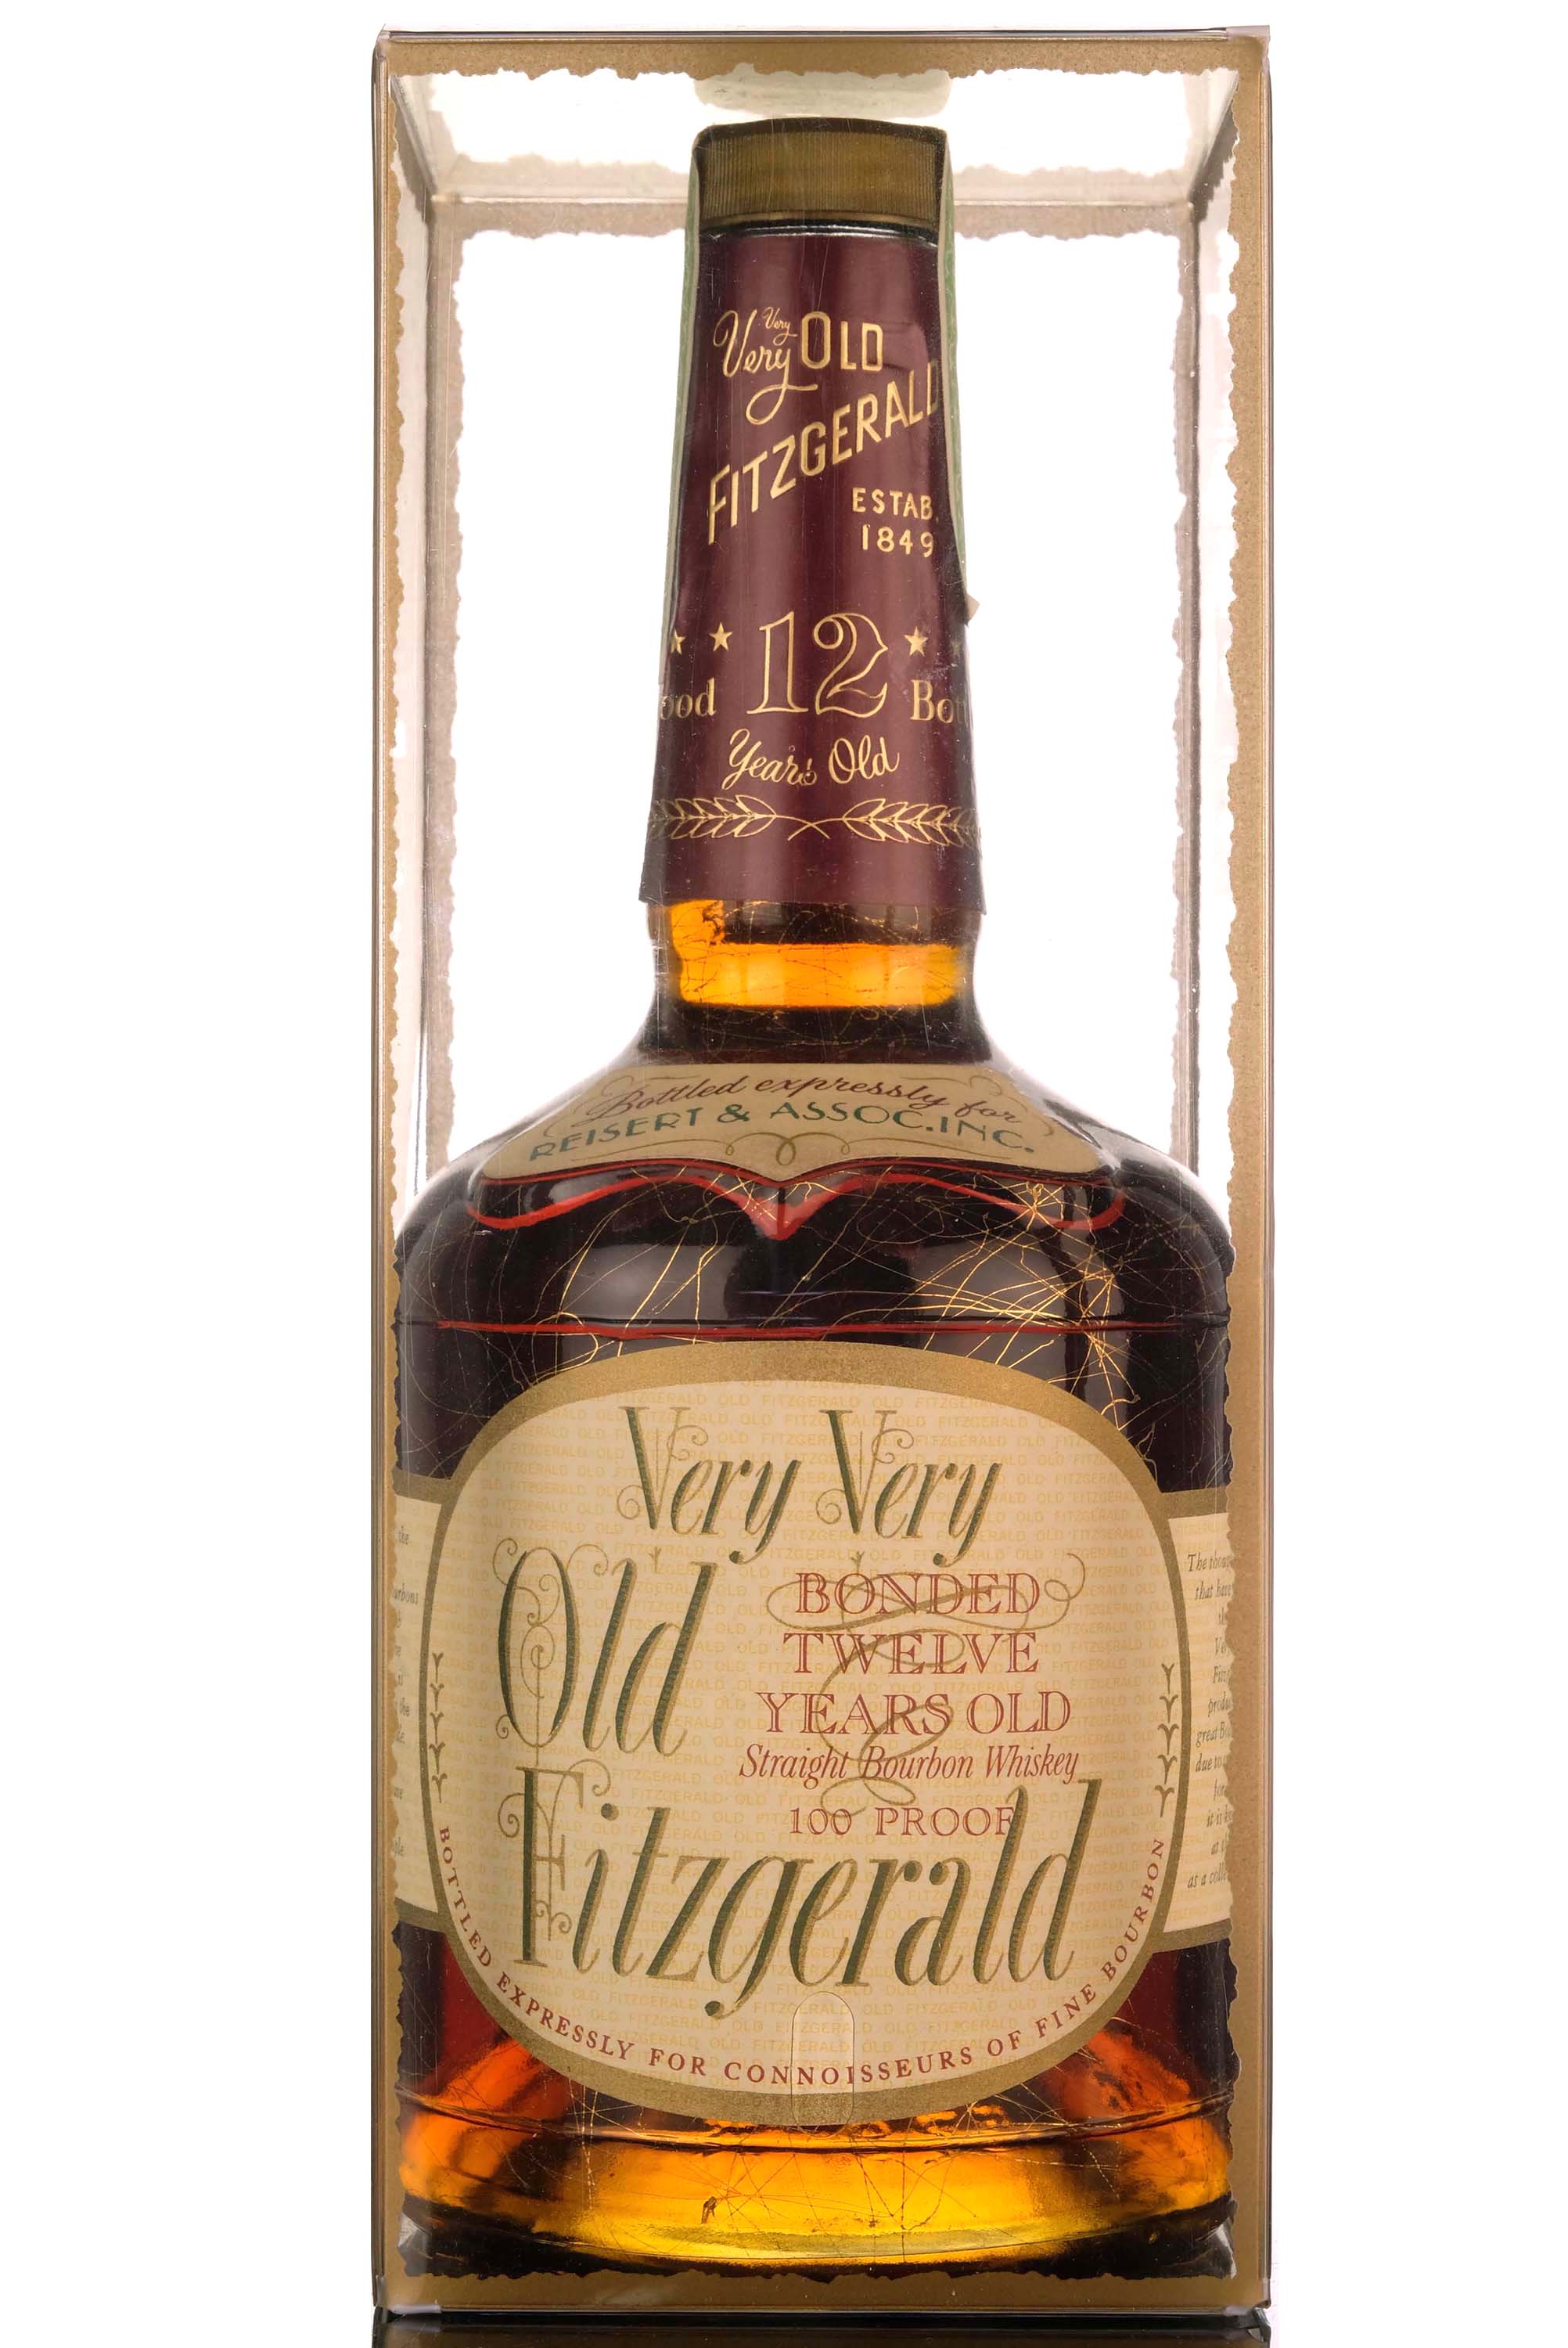 Very Very Old Fitzgerald 12 Year Old - 1986 Release - 100 Proof - Reisert & Associates Inc